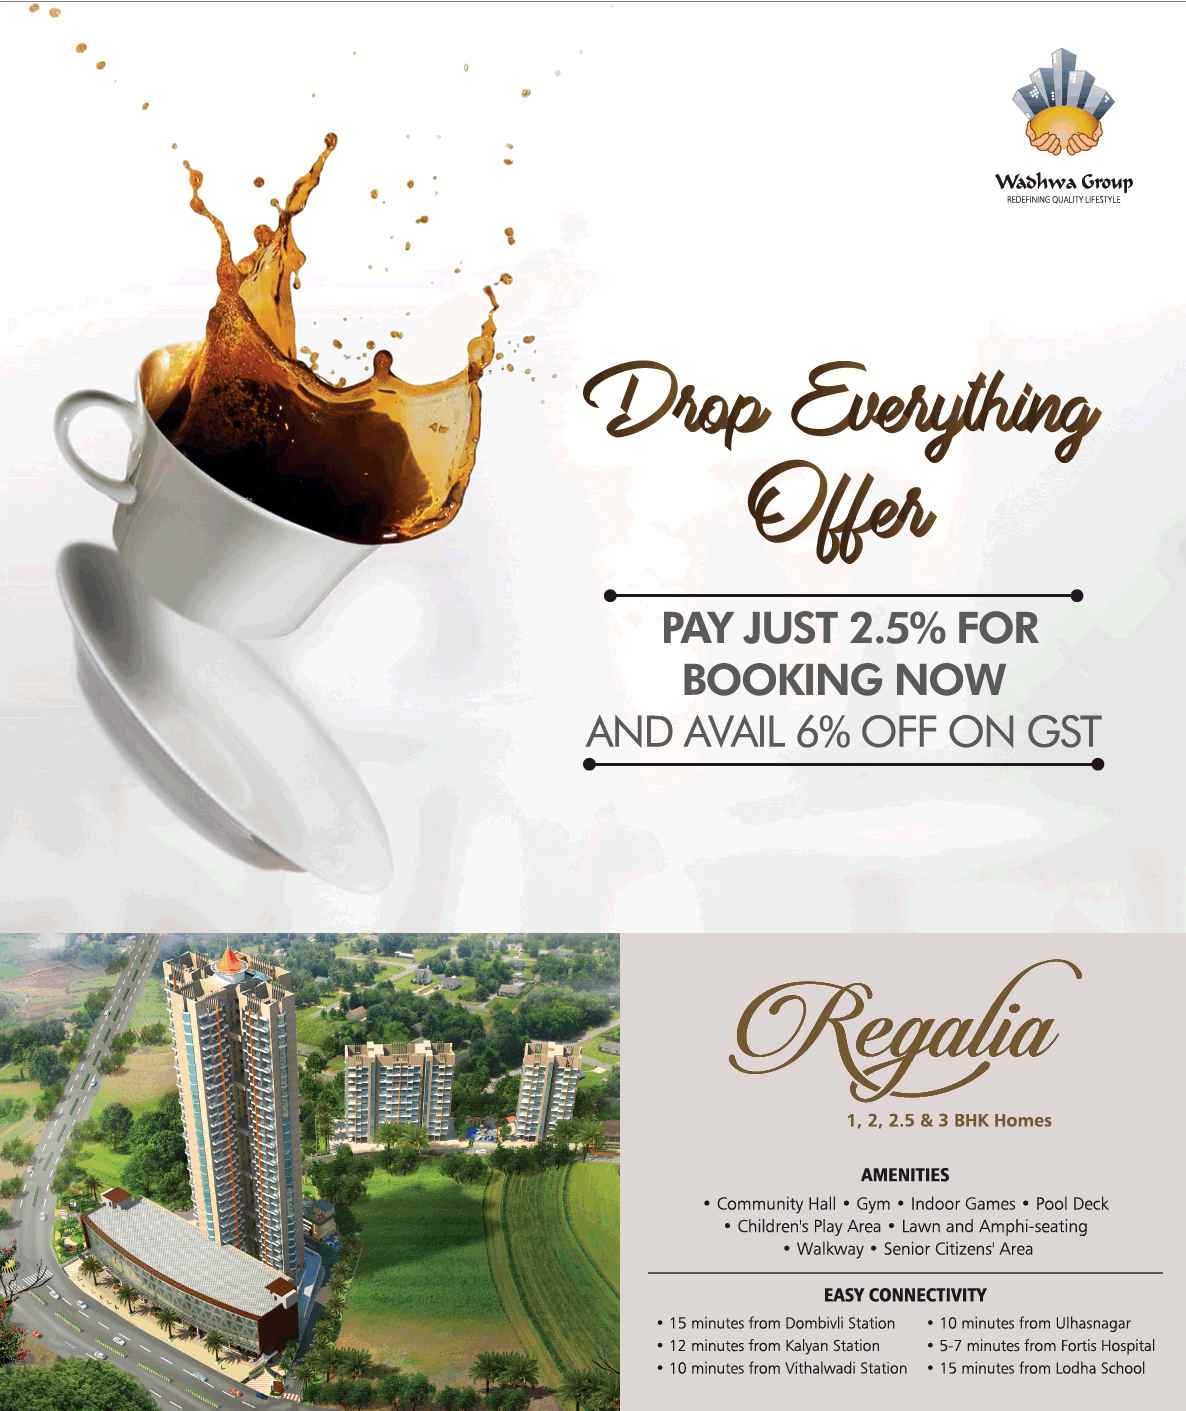 Pay just 2.5% for booking now and avail 6% off on GST at Wadhwa Regalia in Mumbai Update